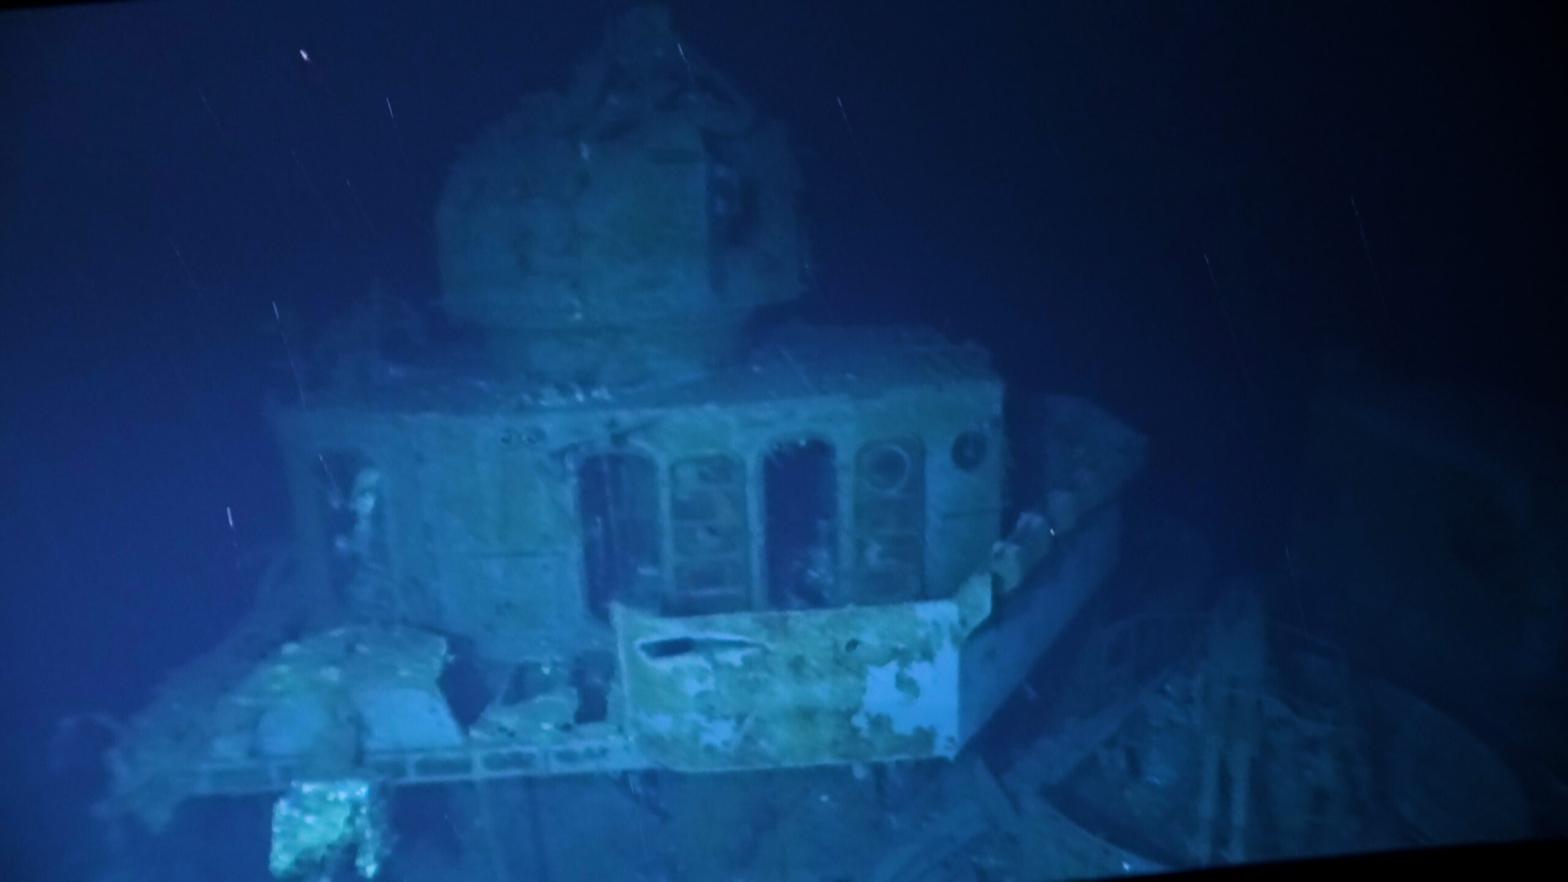 Evidence of battle damage can be seen on the wreck.  (Image: Caladan Oceanic)